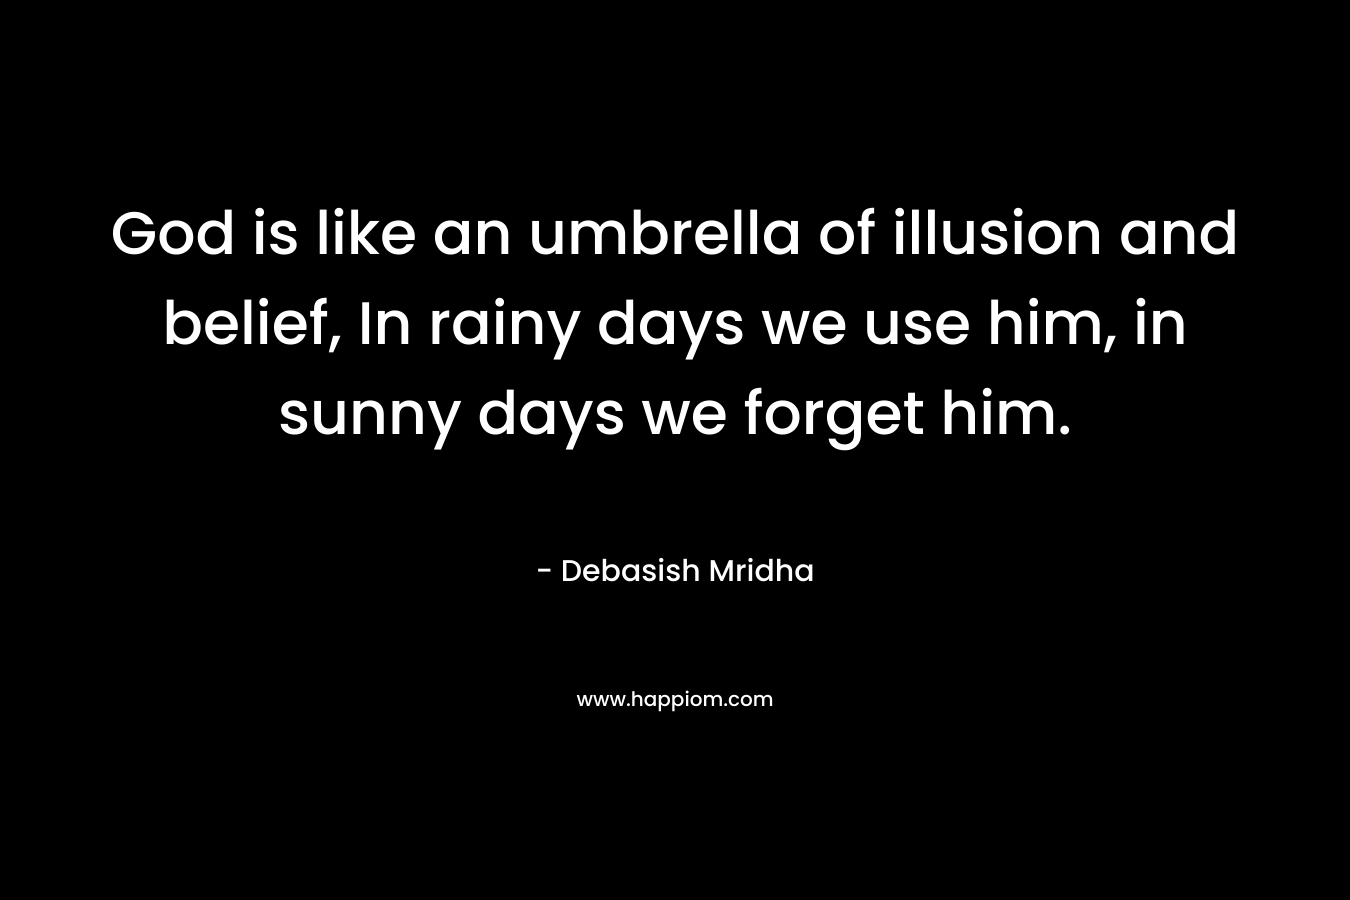 God is like an umbrella of illusion and belief, In rainy days we use him, in sunny days we forget him.